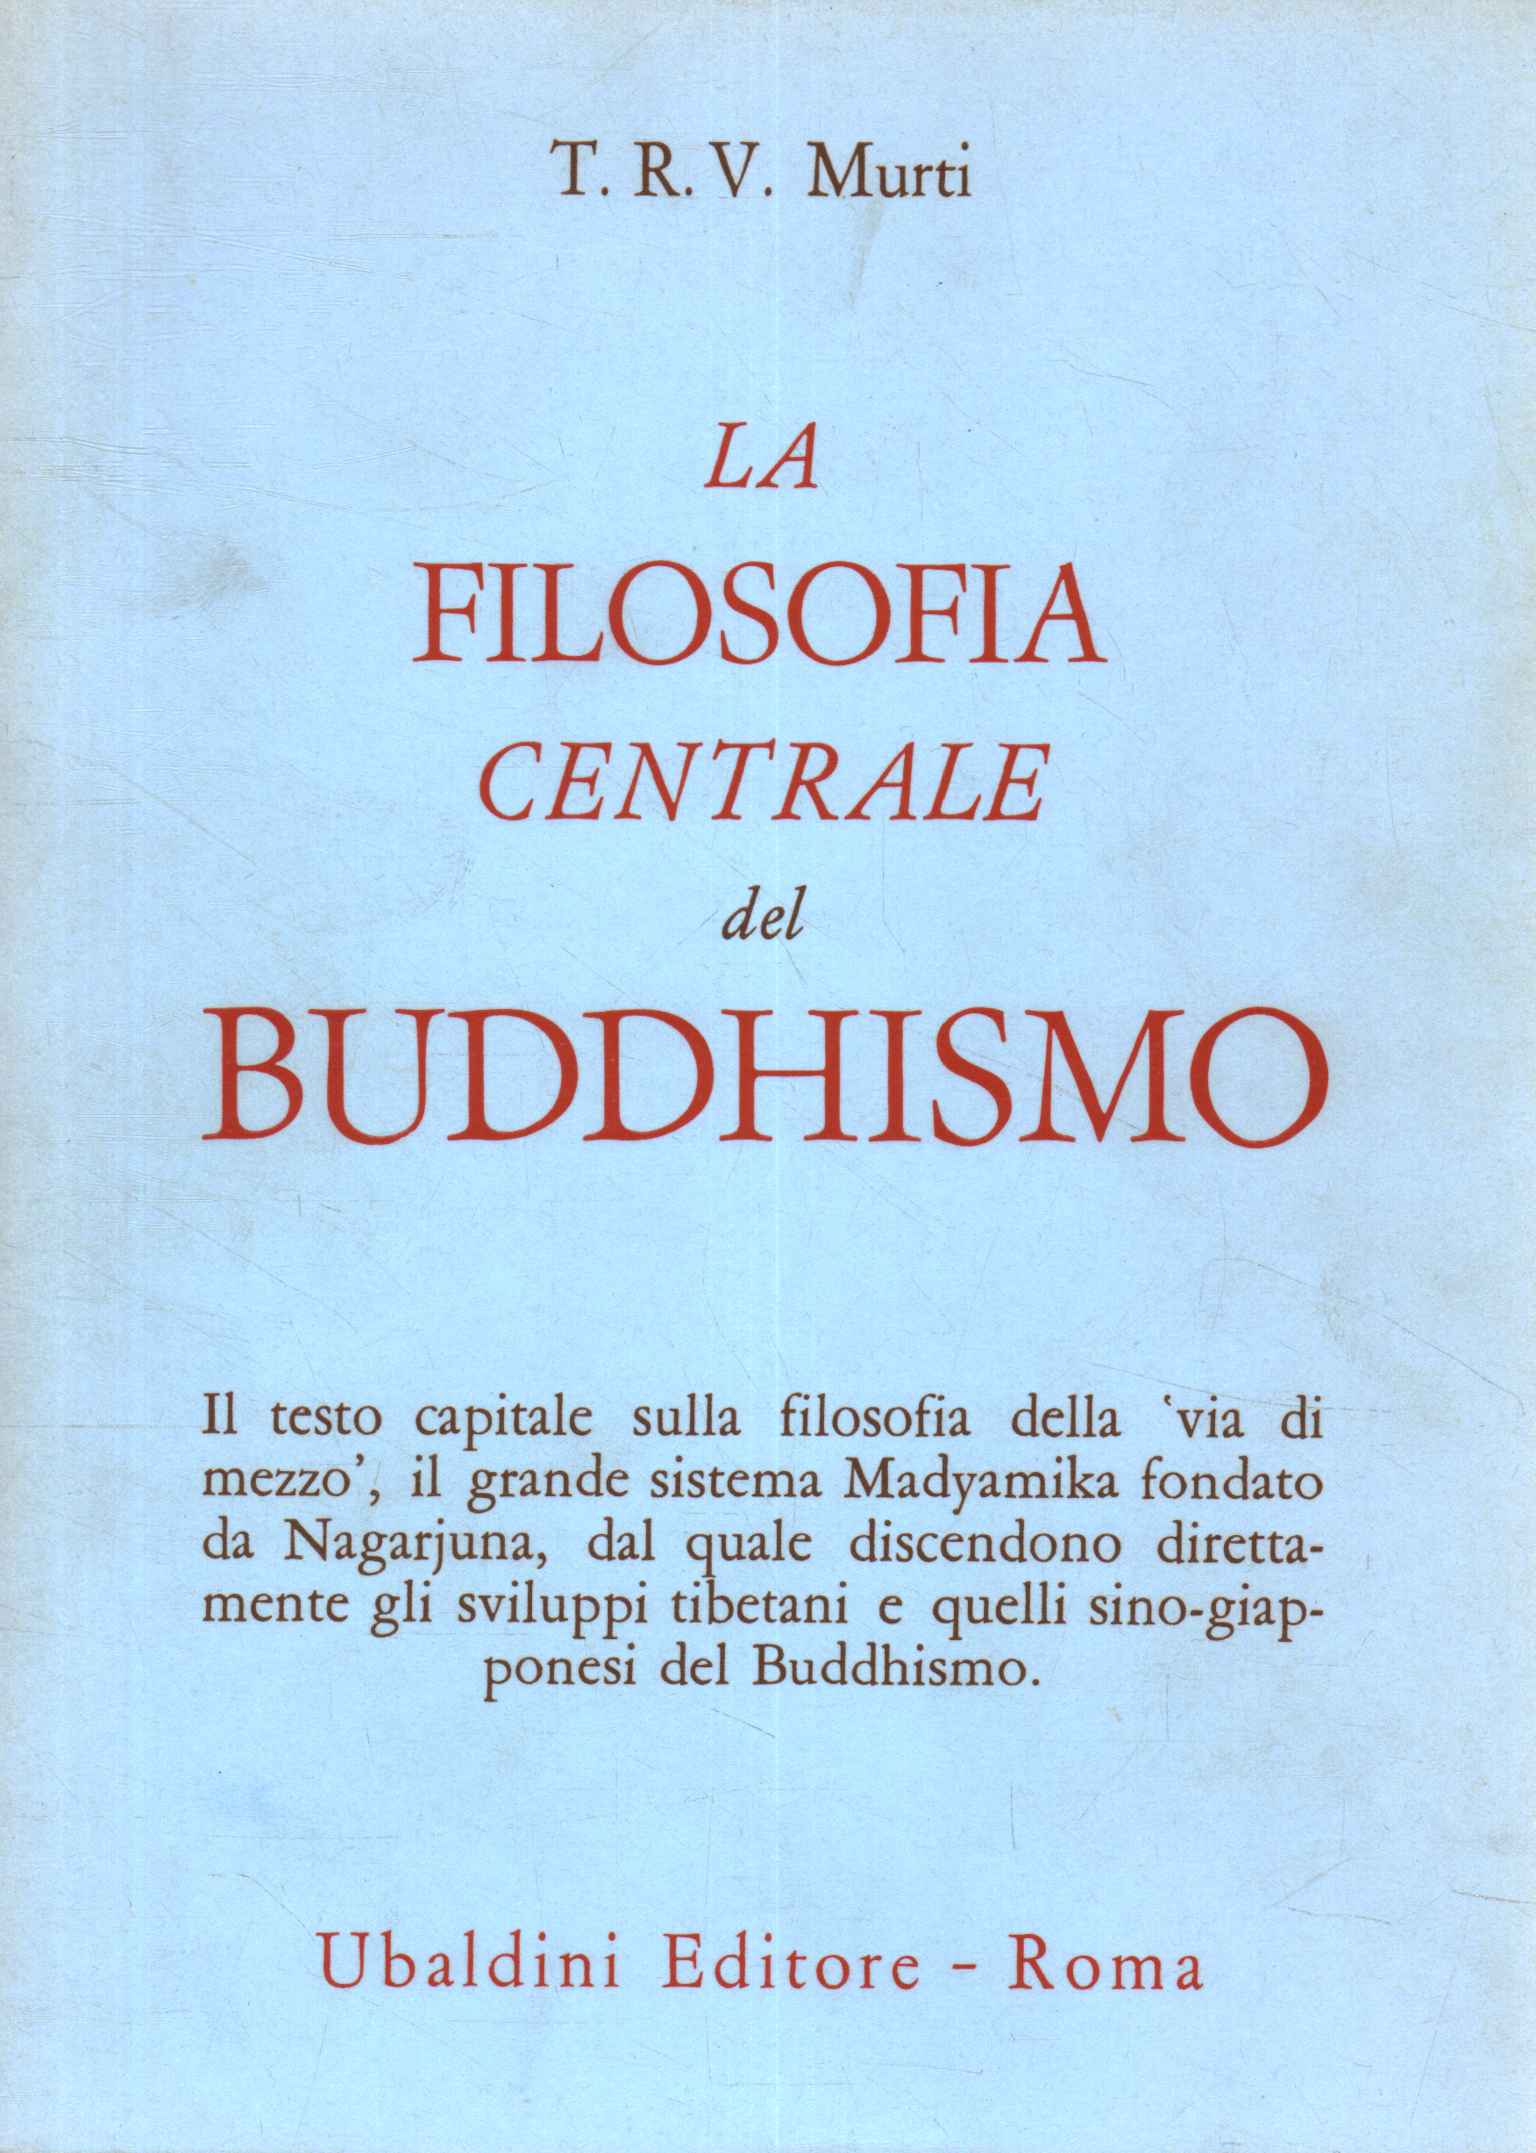 The central philosophy of Buddhism